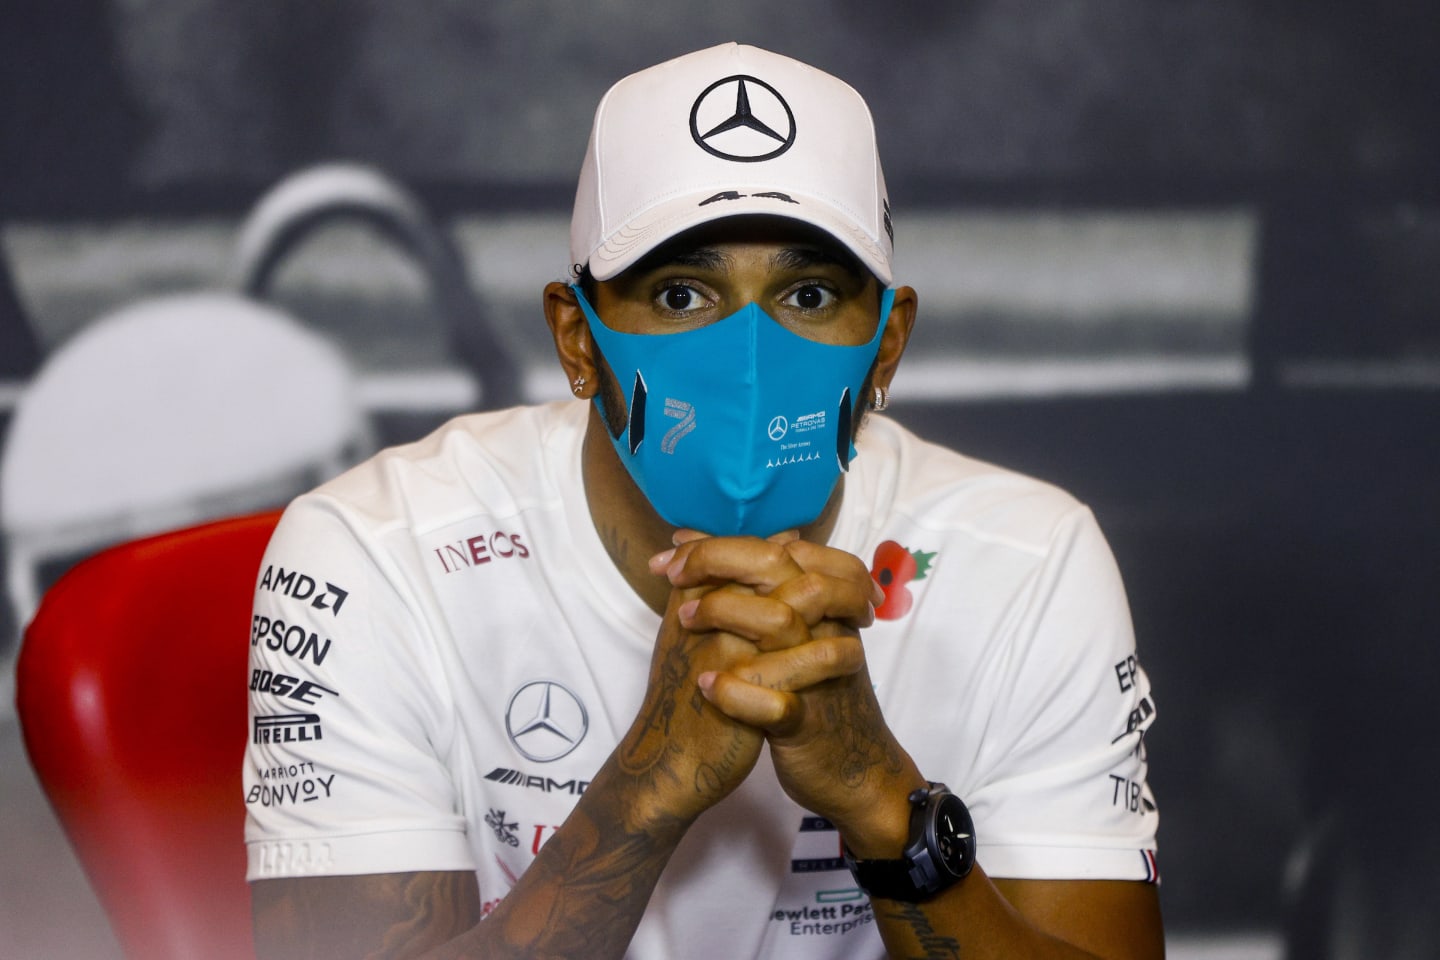 IMOLA, ITALY - NOVEMBER 01: Race winner Lewis Hamilton of Great Britain and Mercedes GP talks in